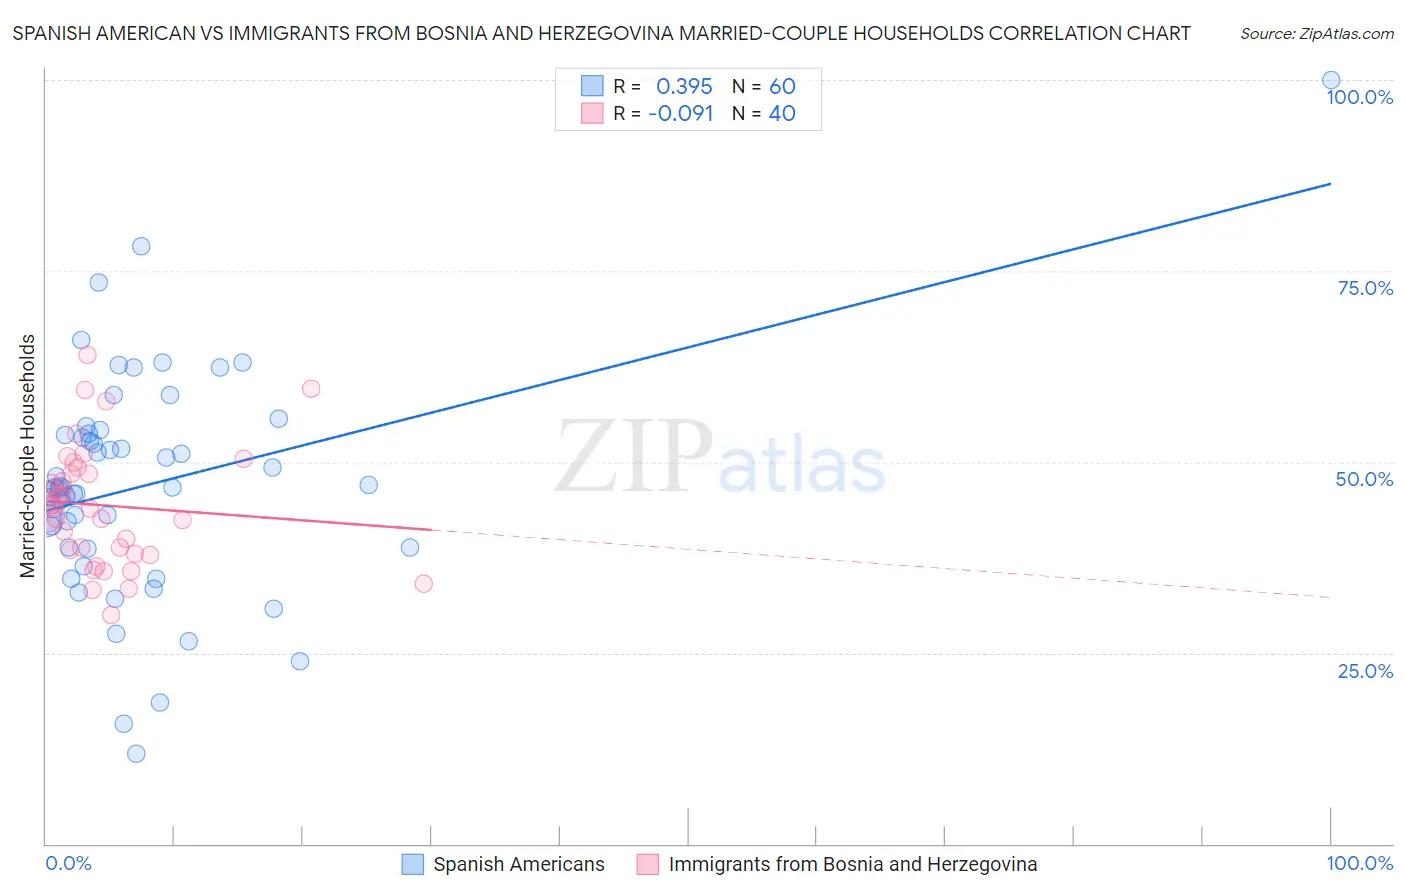 Spanish American vs Immigrants from Bosnia and Herzegovina Married-couple Households